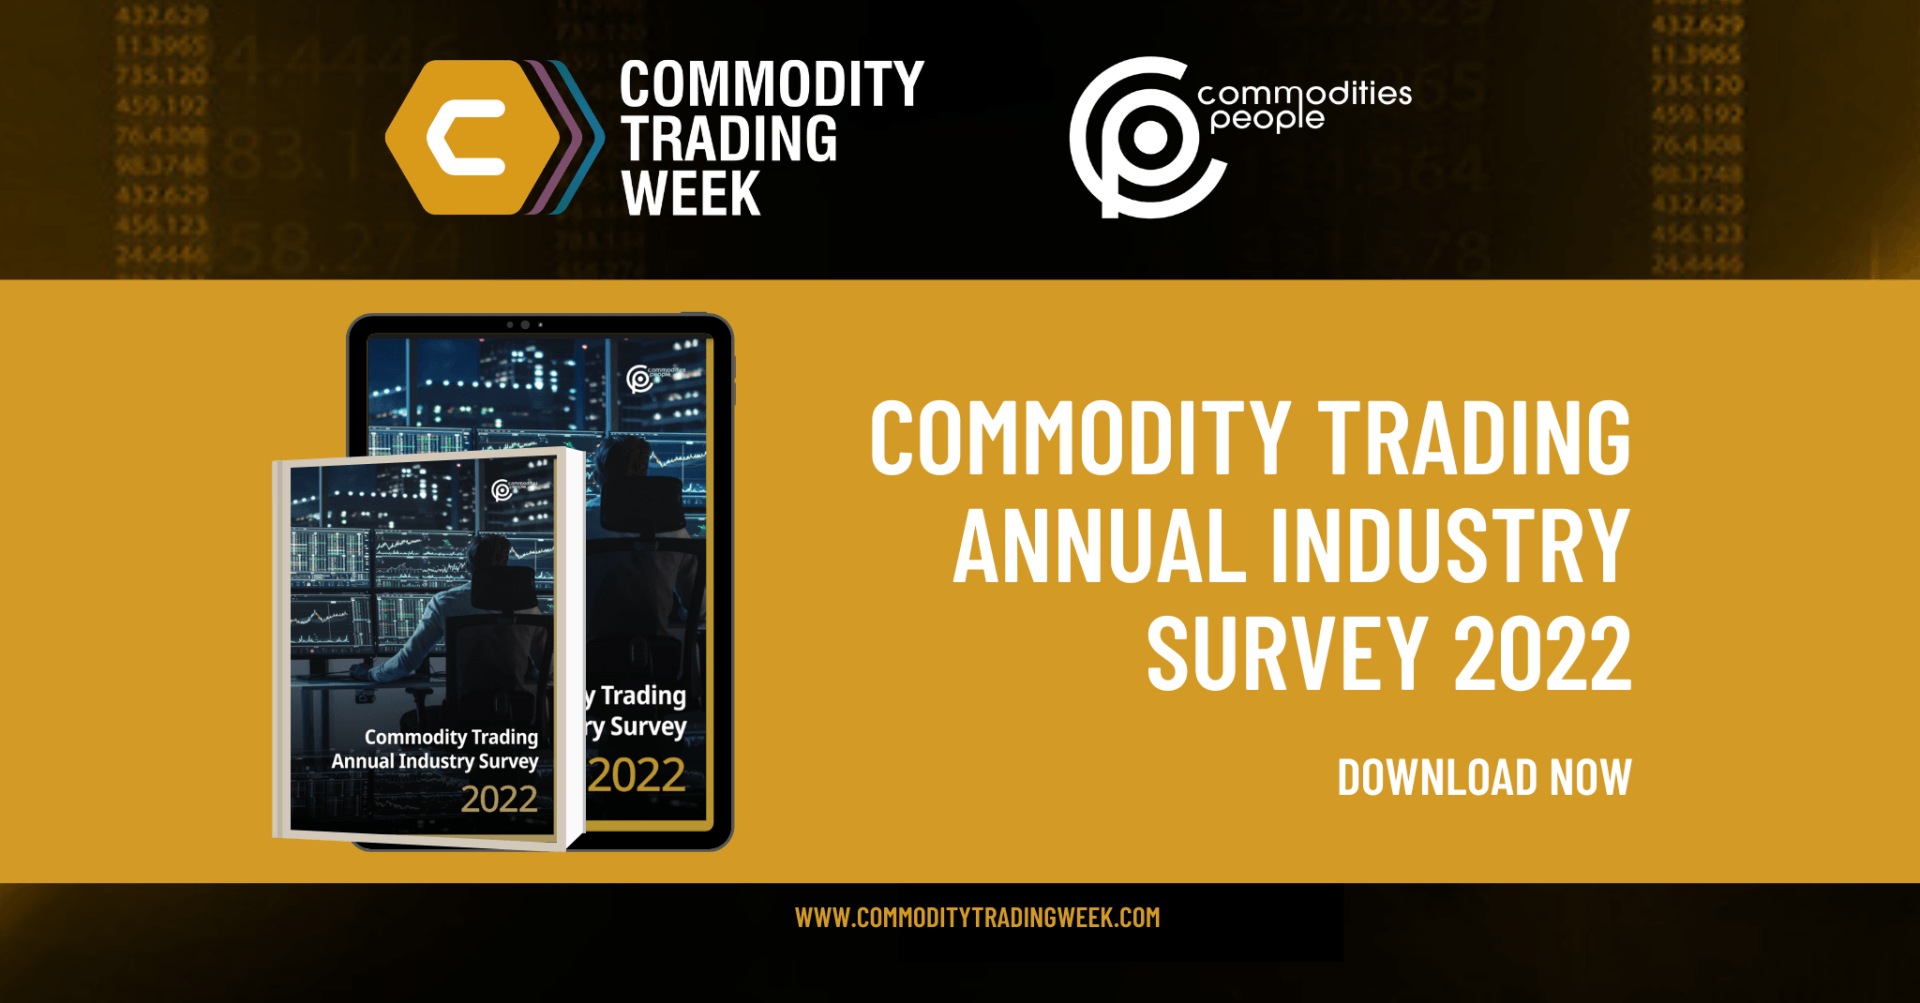 Commodity Trading Annual Industry Survey 2022